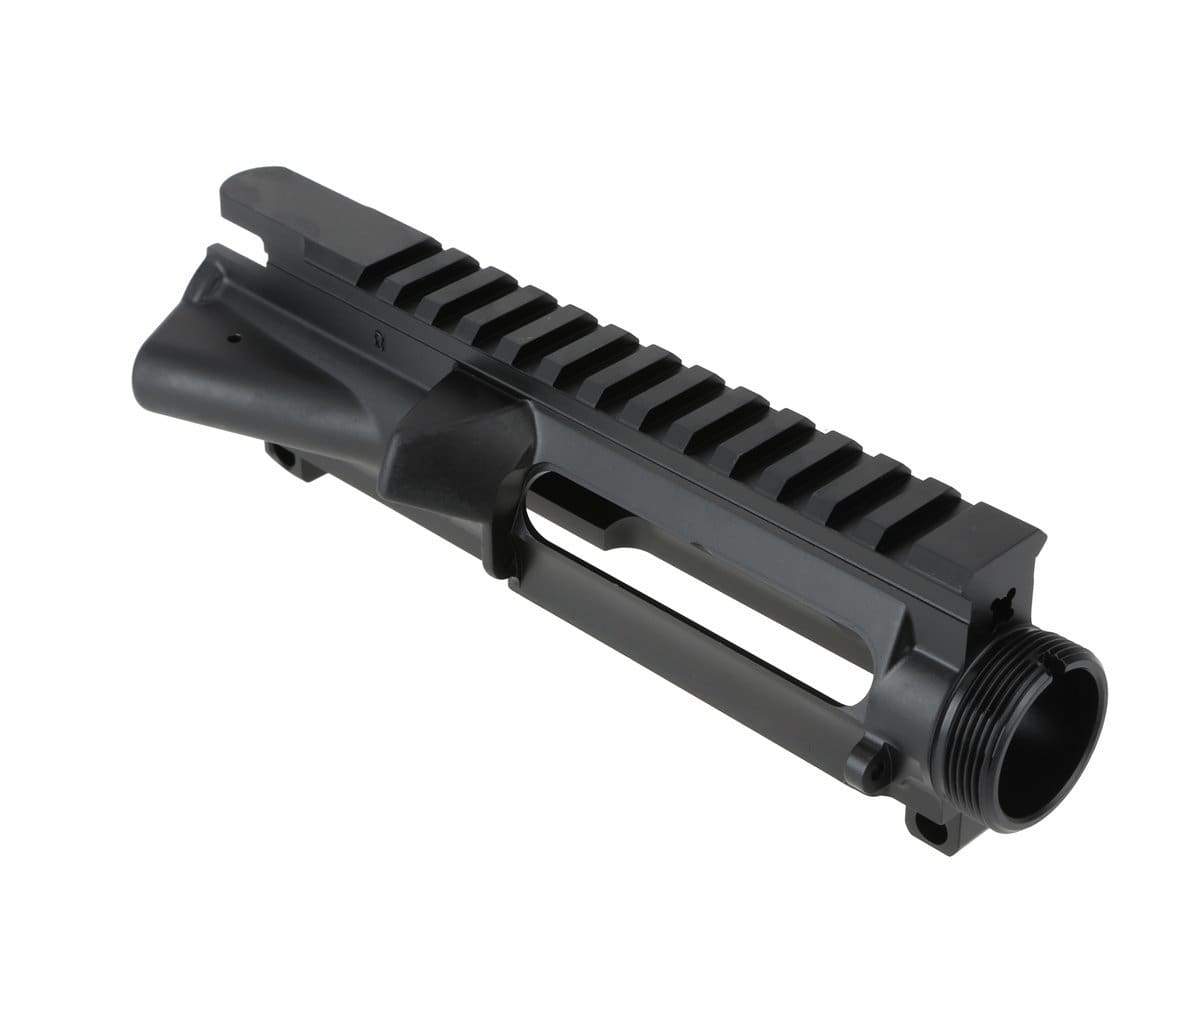 Anderson Stripped Upper Receiver 